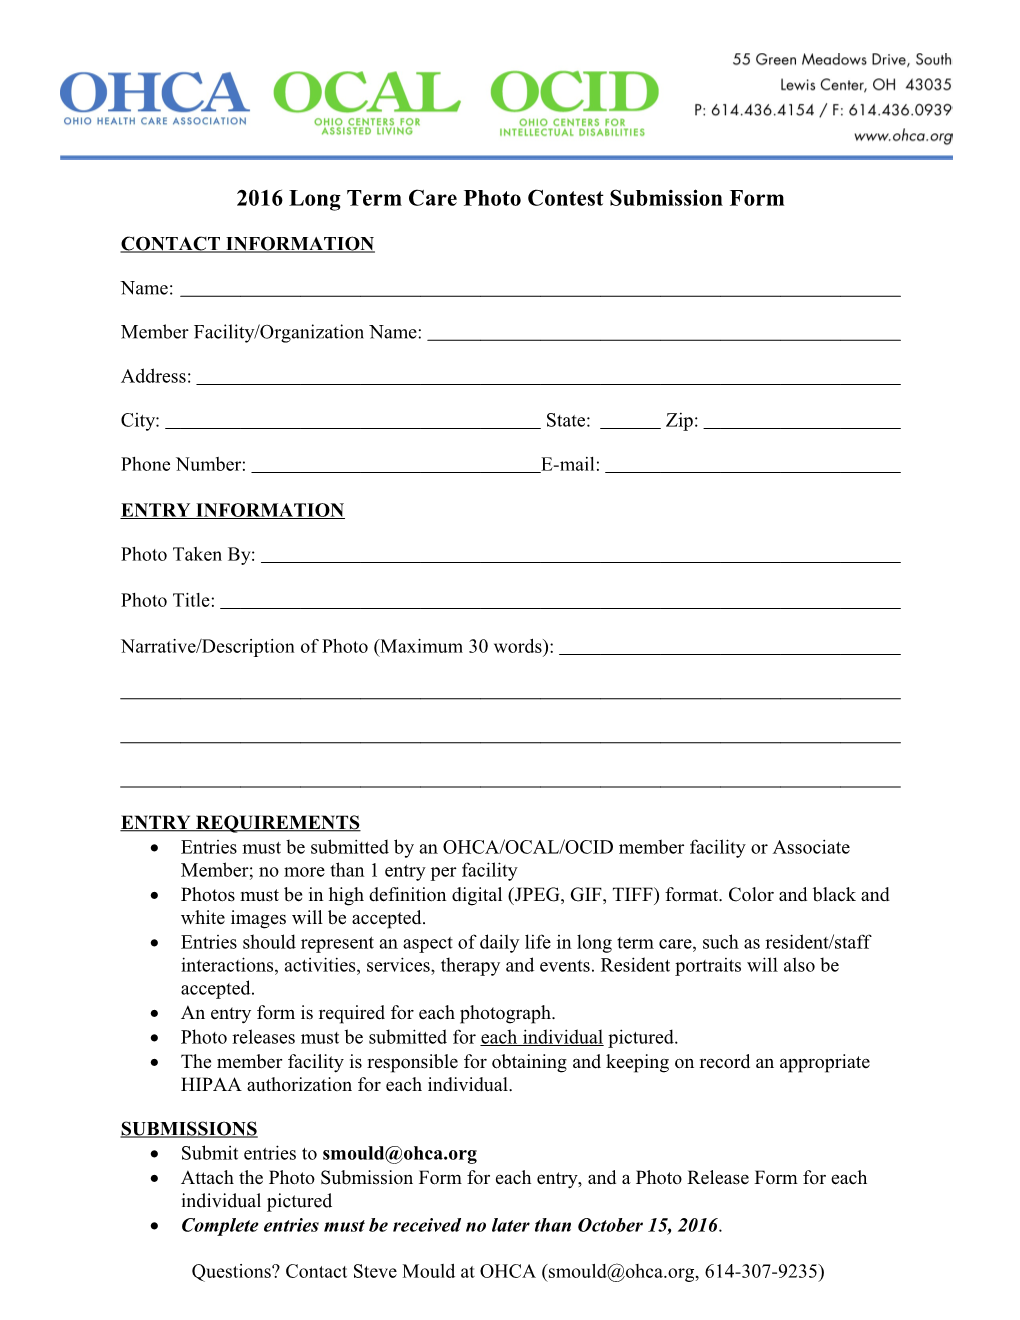 2016 Long Term Care Photo Contest Submission Form